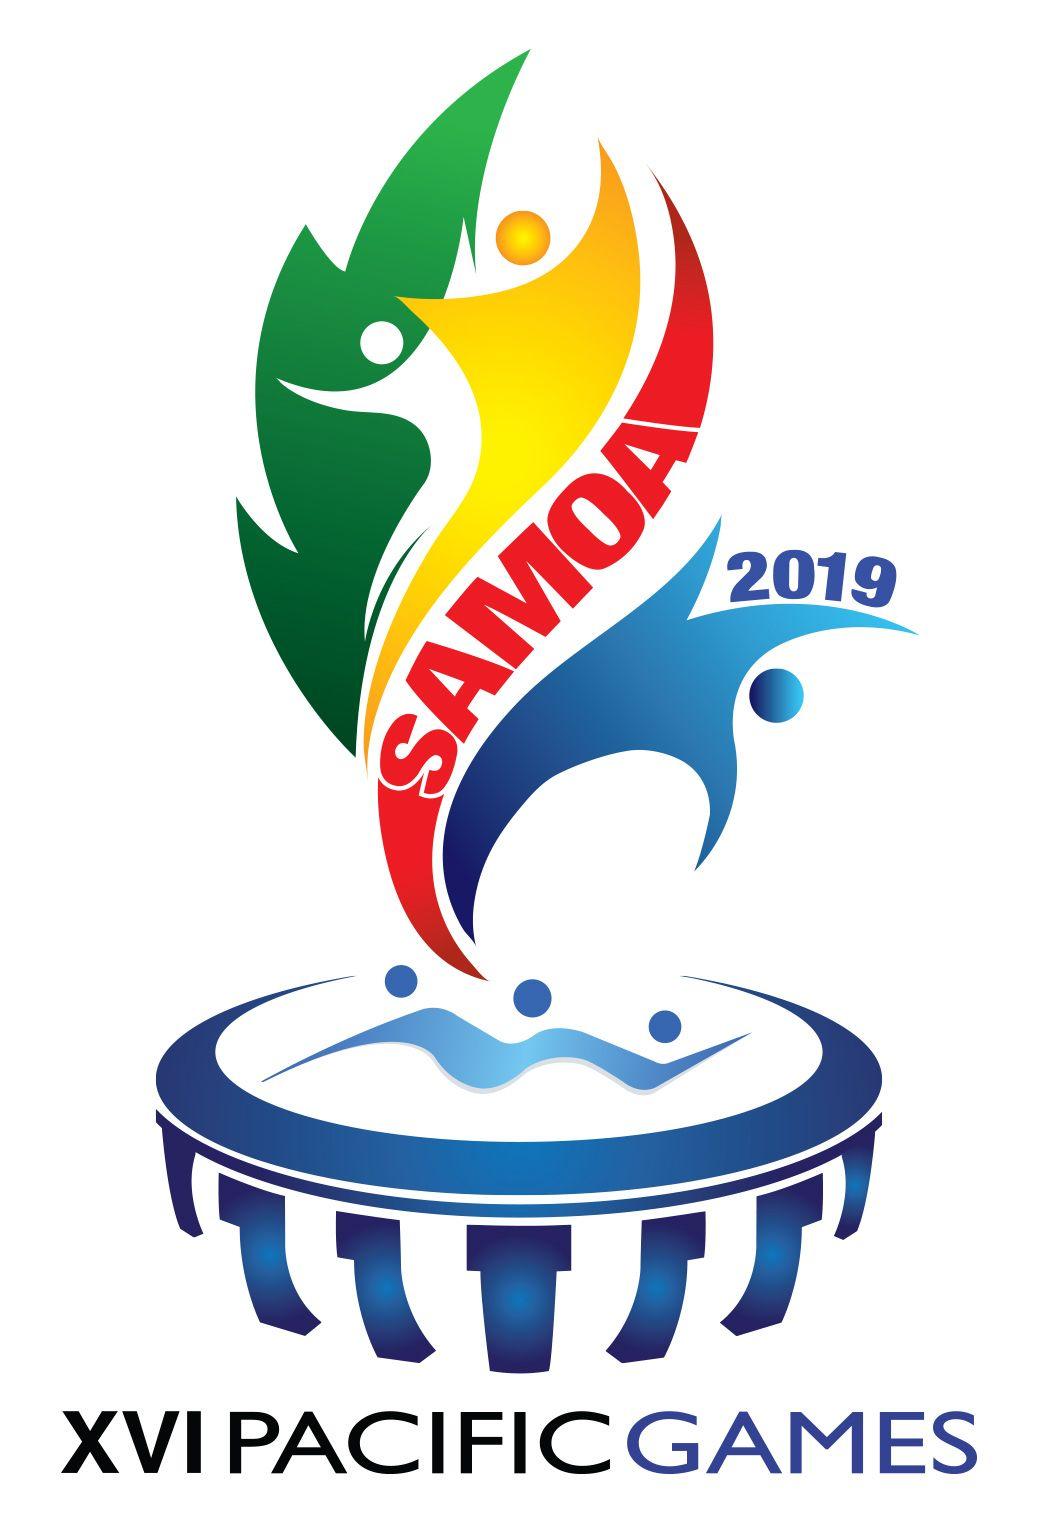 Later Logo - Samoa 2019 Pacific Games Logo Unveiled